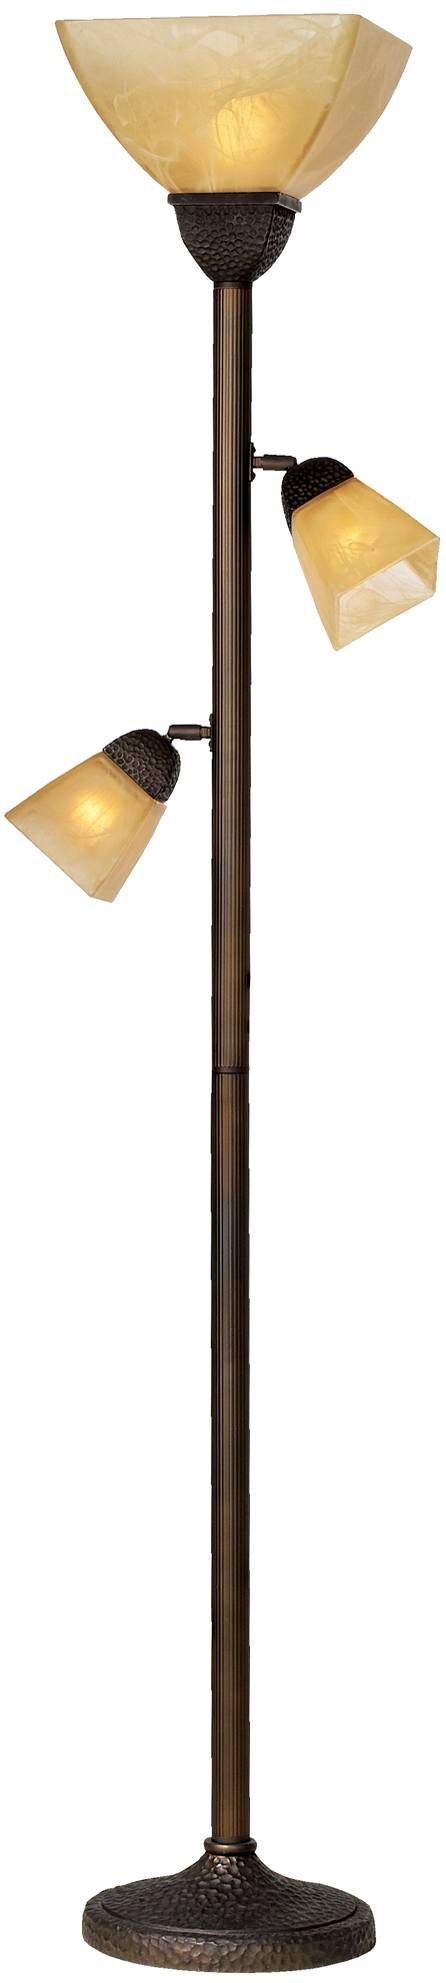 Franklin Iron Works Rustic Farmhouse Mission Torchiere Floor Lamp 71 1/2" Tall Roman Bronze 3-Light Frosted Champagne Amber Glass Shade for Living Room Reading Bedroom Office House Home Decor